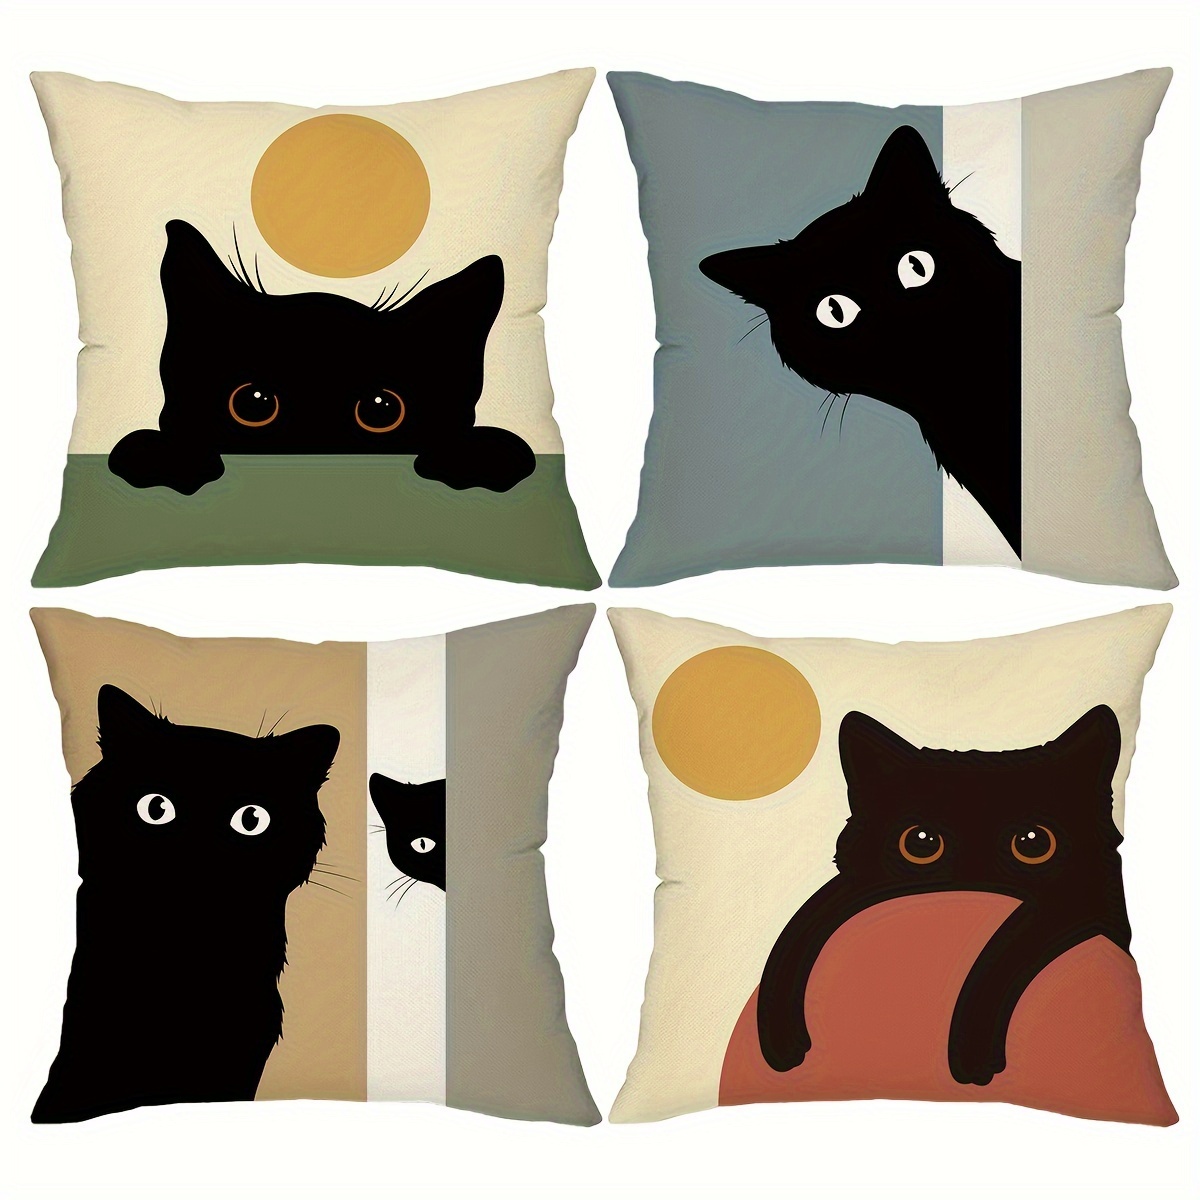 

4pcs Black Cat Color Blocking Throw Pillow Covers, 18*18inch Modern Abstract Home Decor Cushion Cases For Porch Patio Couch Sofa Living Room Outdoor, Farmhouse Style, Without Pillow Inserts